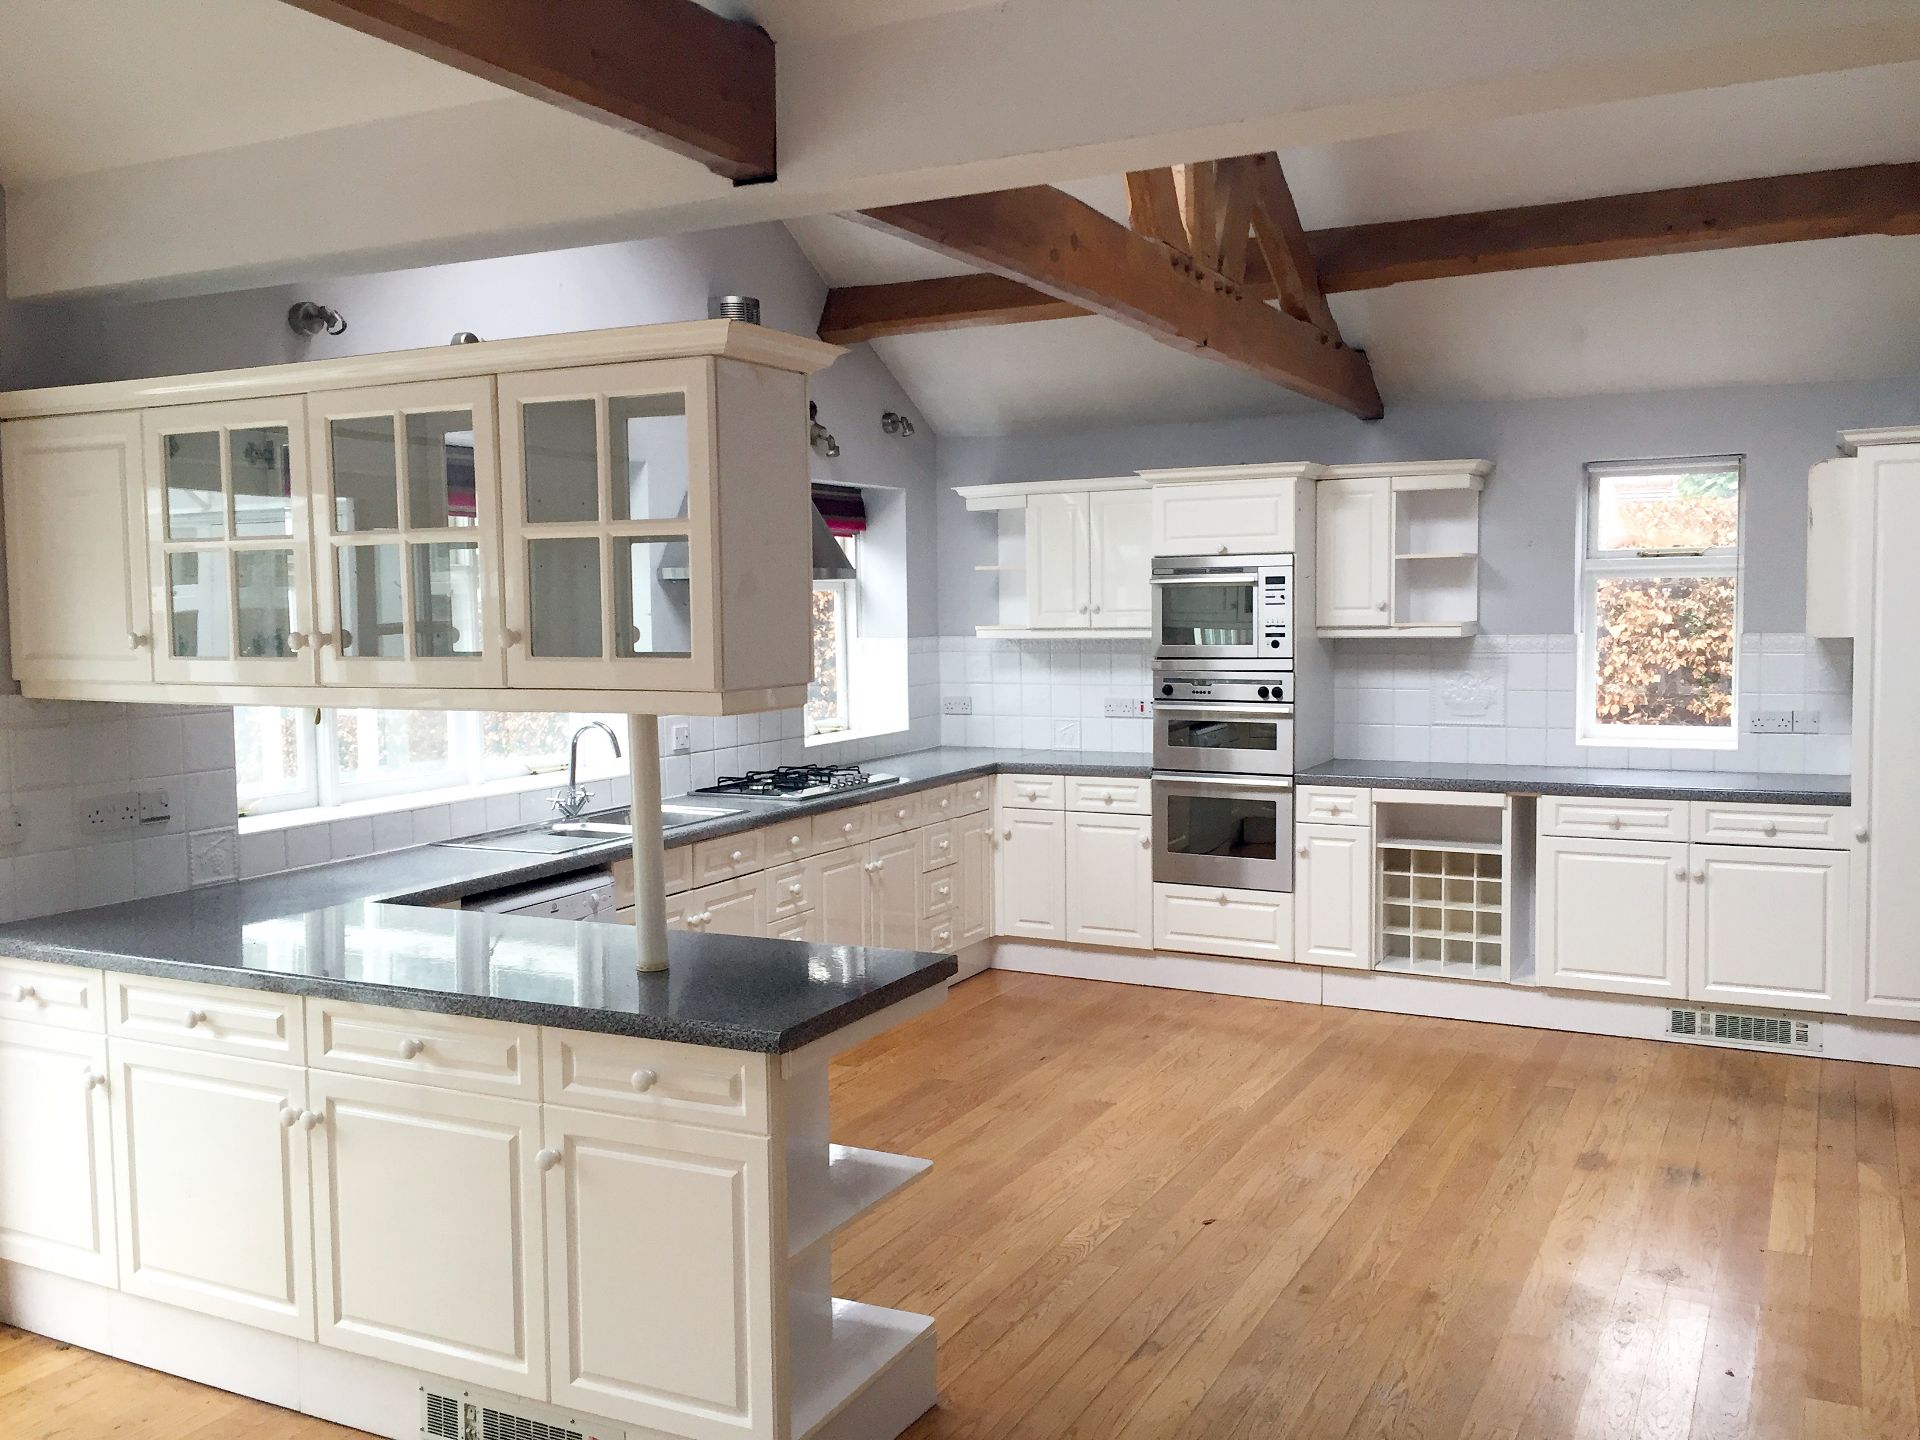 1 x Spacious Bespoke Fitted Kitchen In Cream With Neff And Whirlpool Appliances - Masses Storage - Image 2 of 37